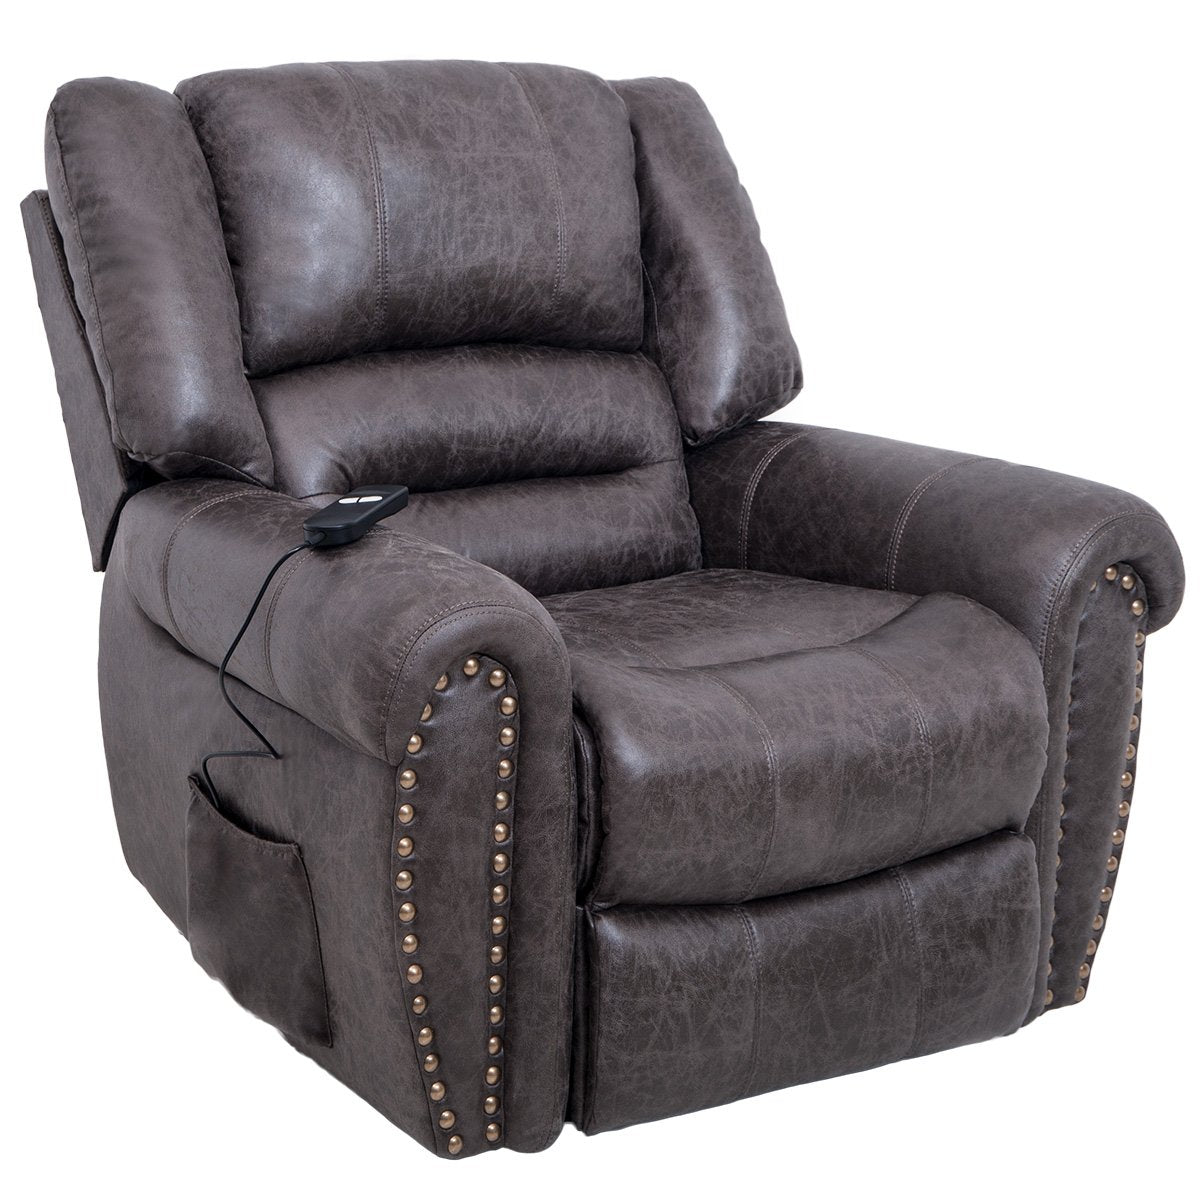 Smoky Brown Series Heavy-Duty Power Lift Recliner Chair